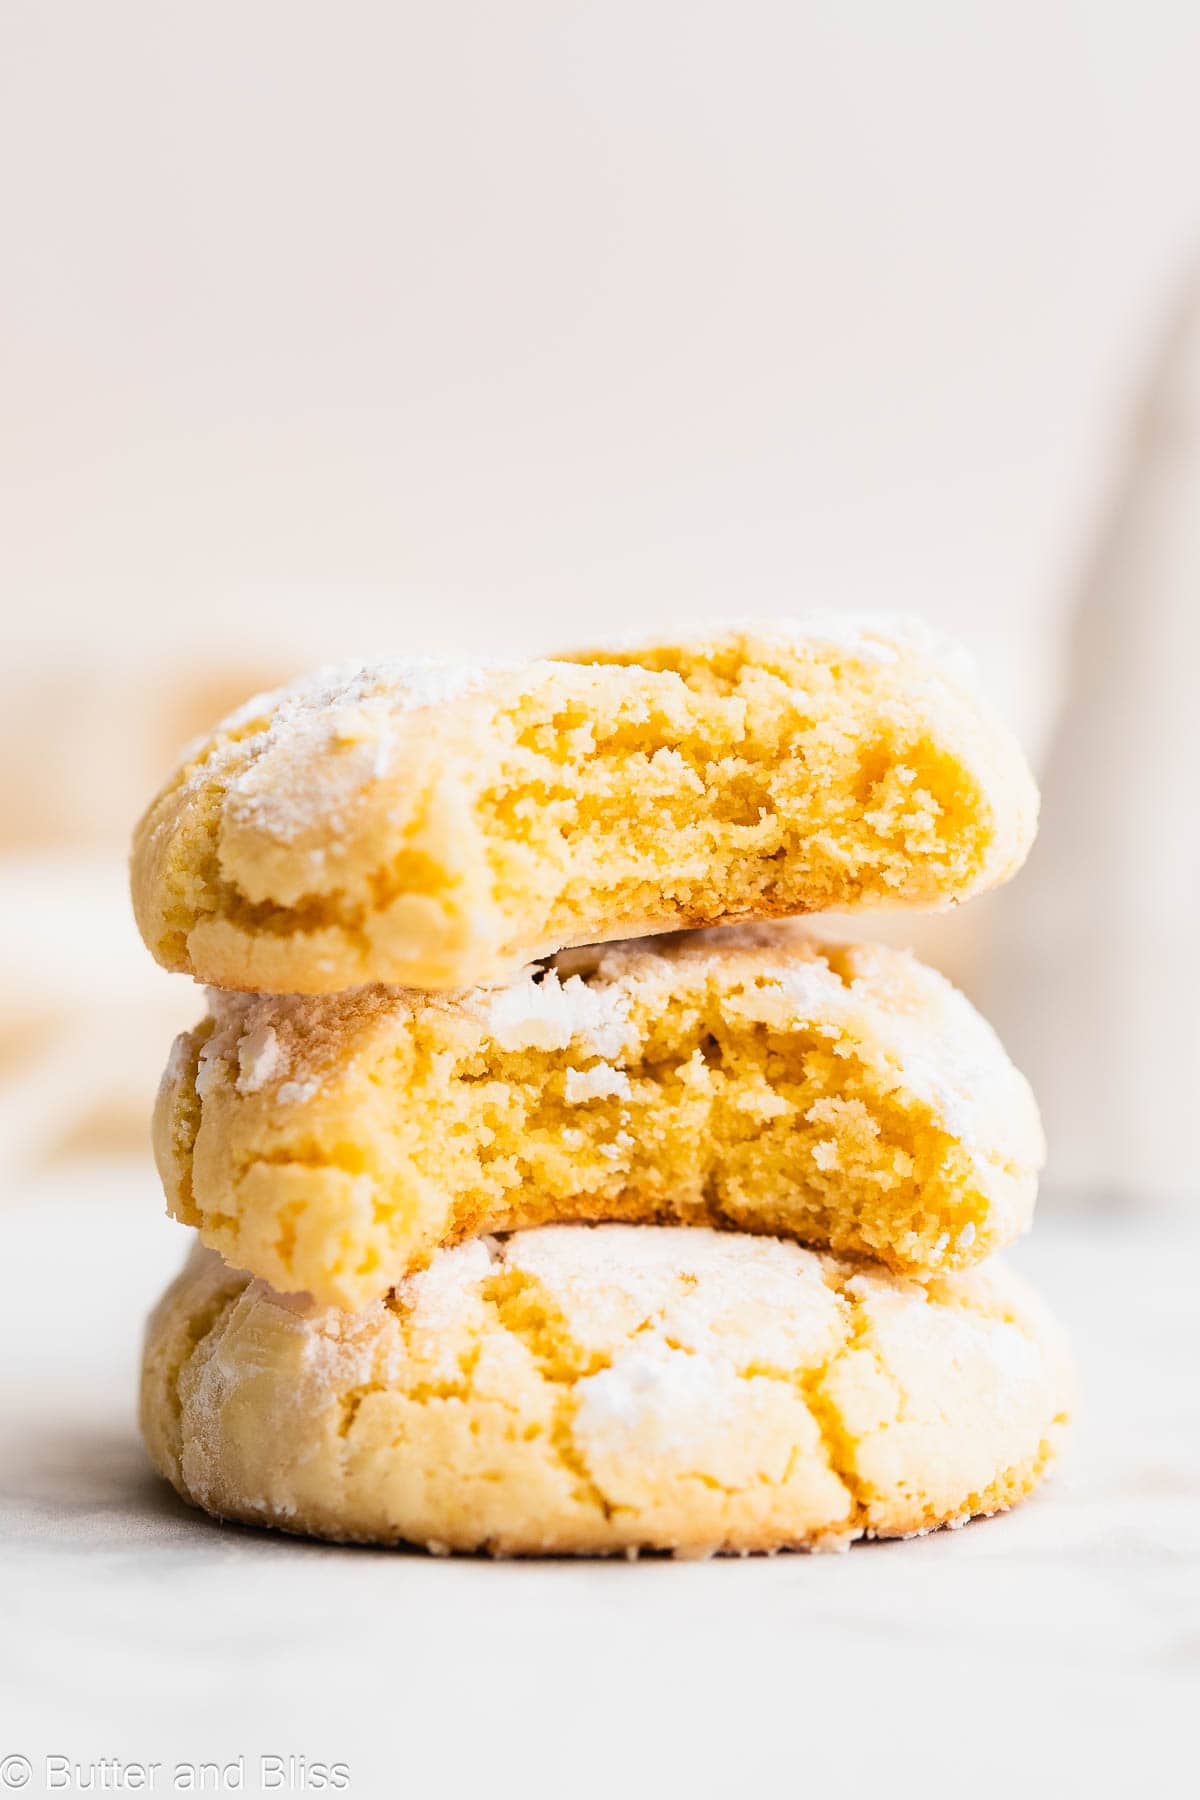 Soft and chewy inside of a gluten free lemon crinkle stacked on another cookie.